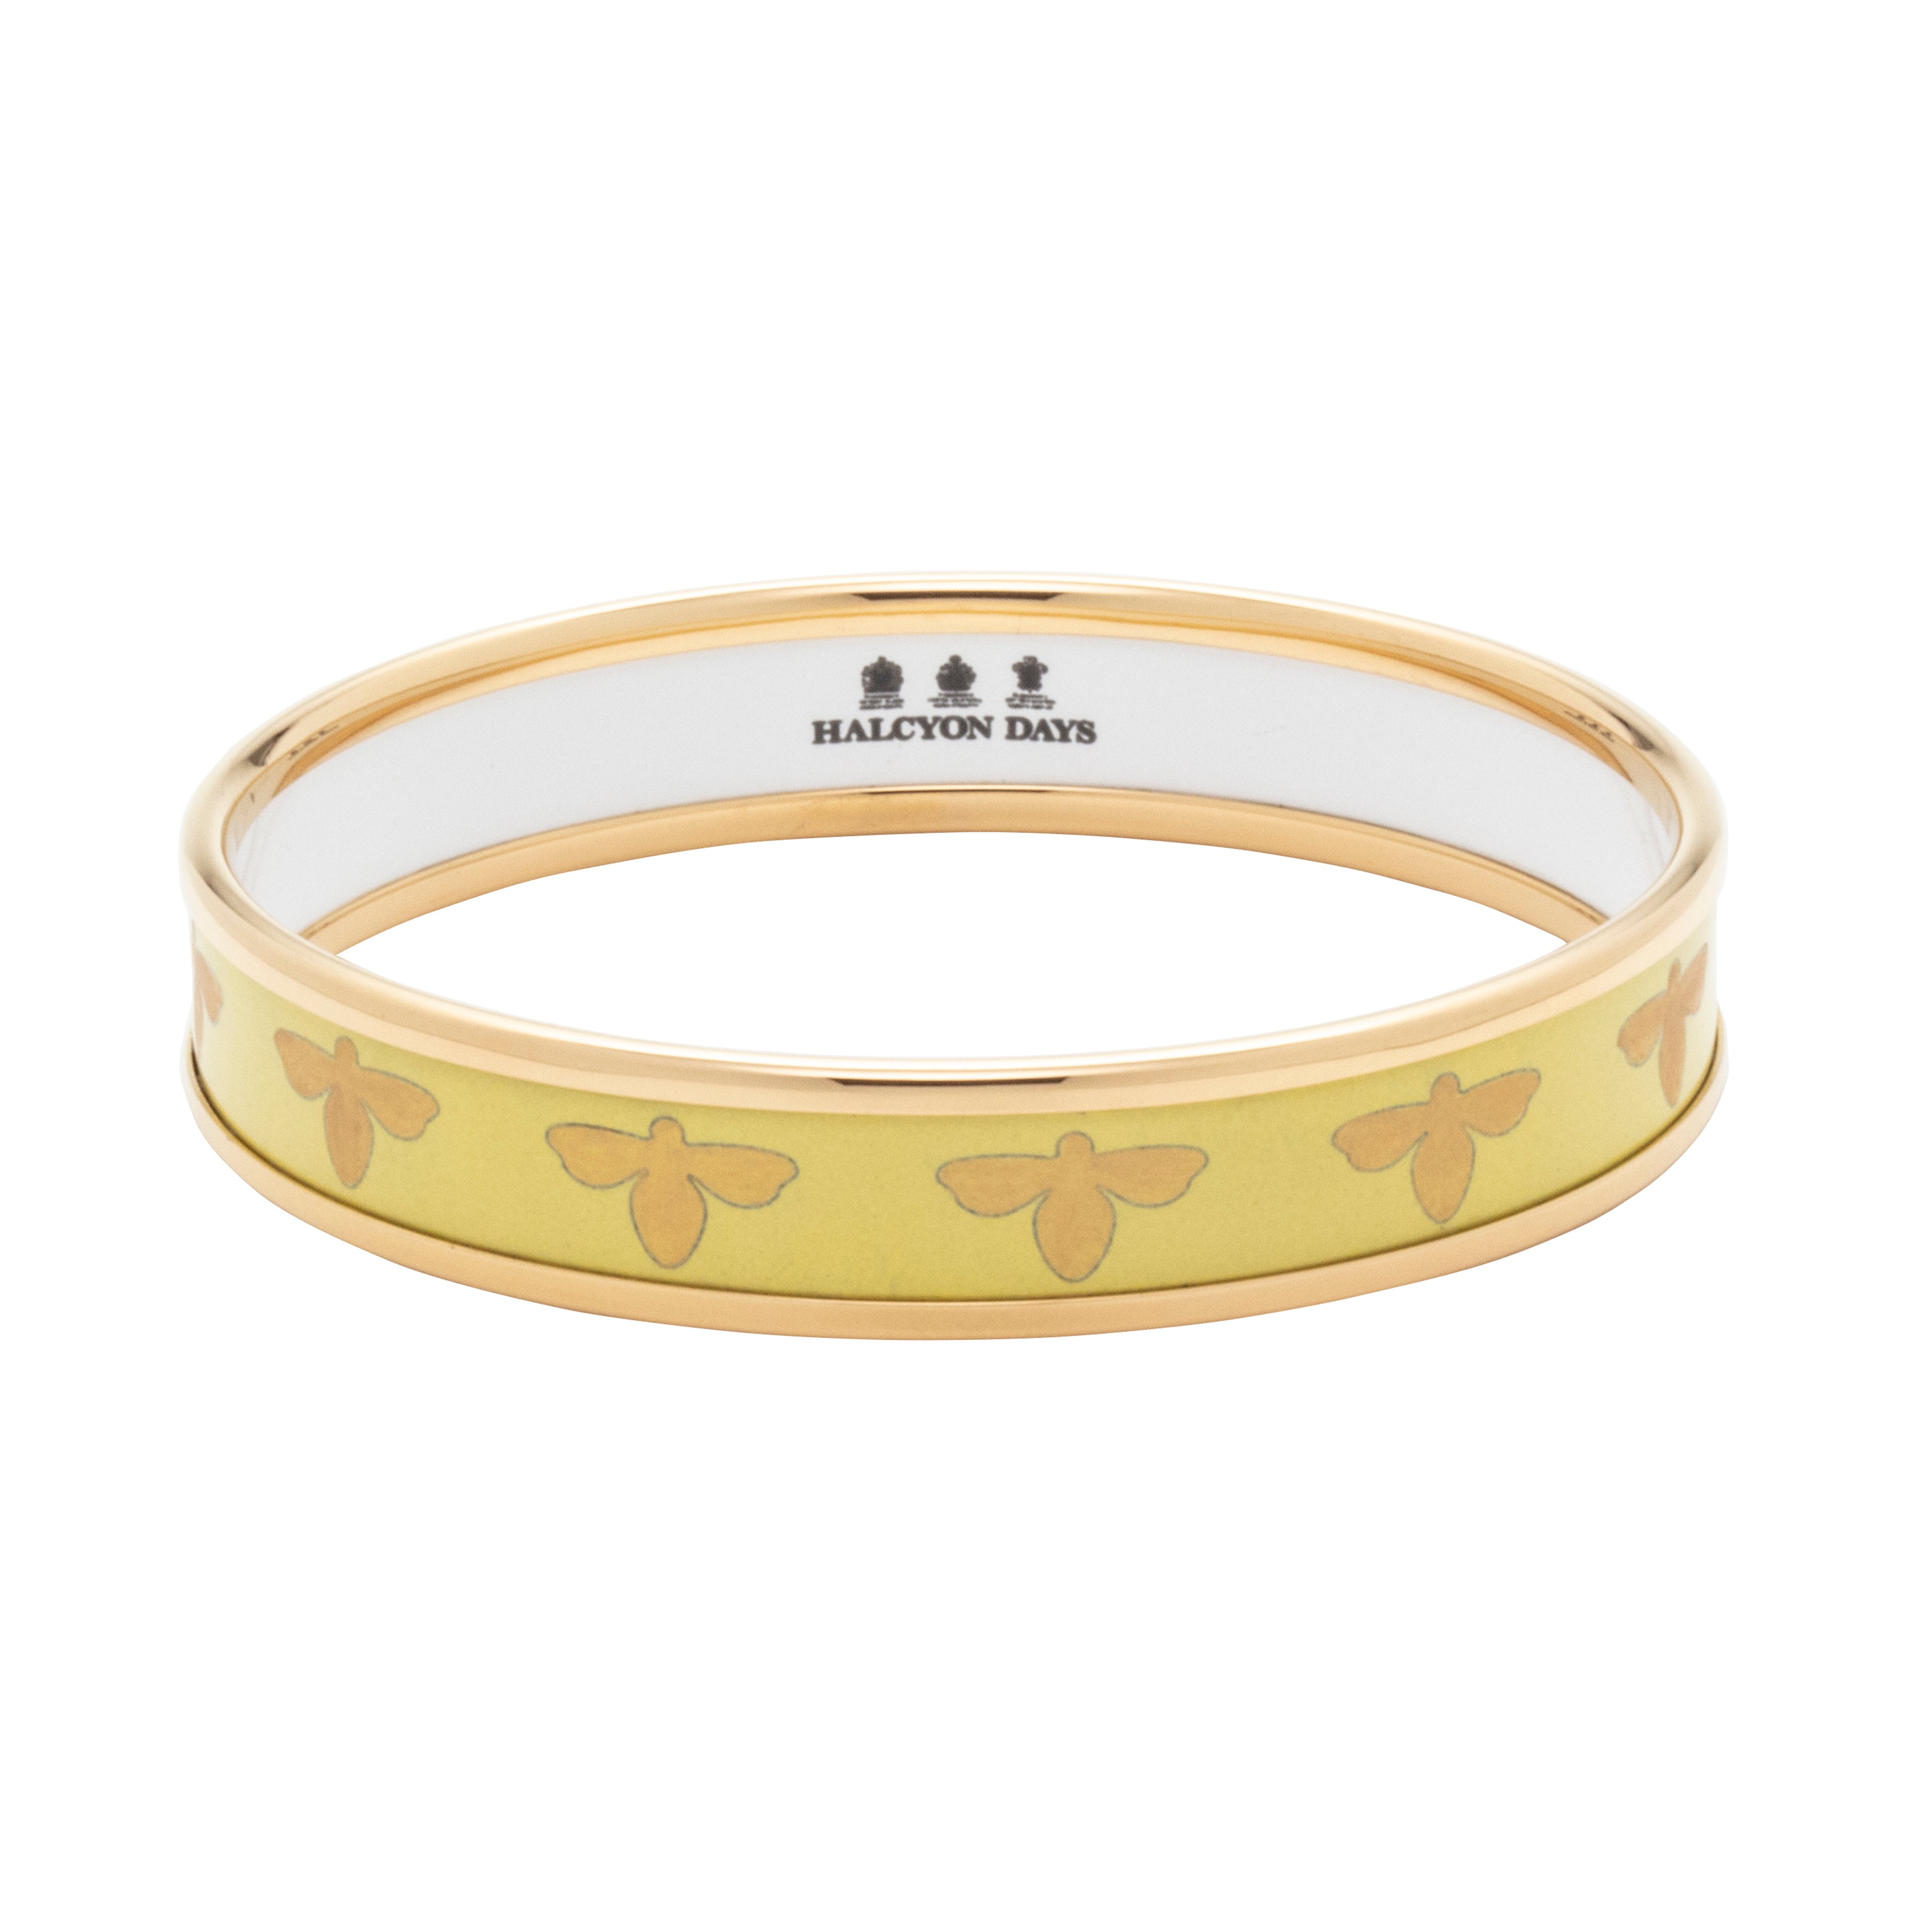 Halcyon Days enamel bangle in buttercup and gold with bee pattern